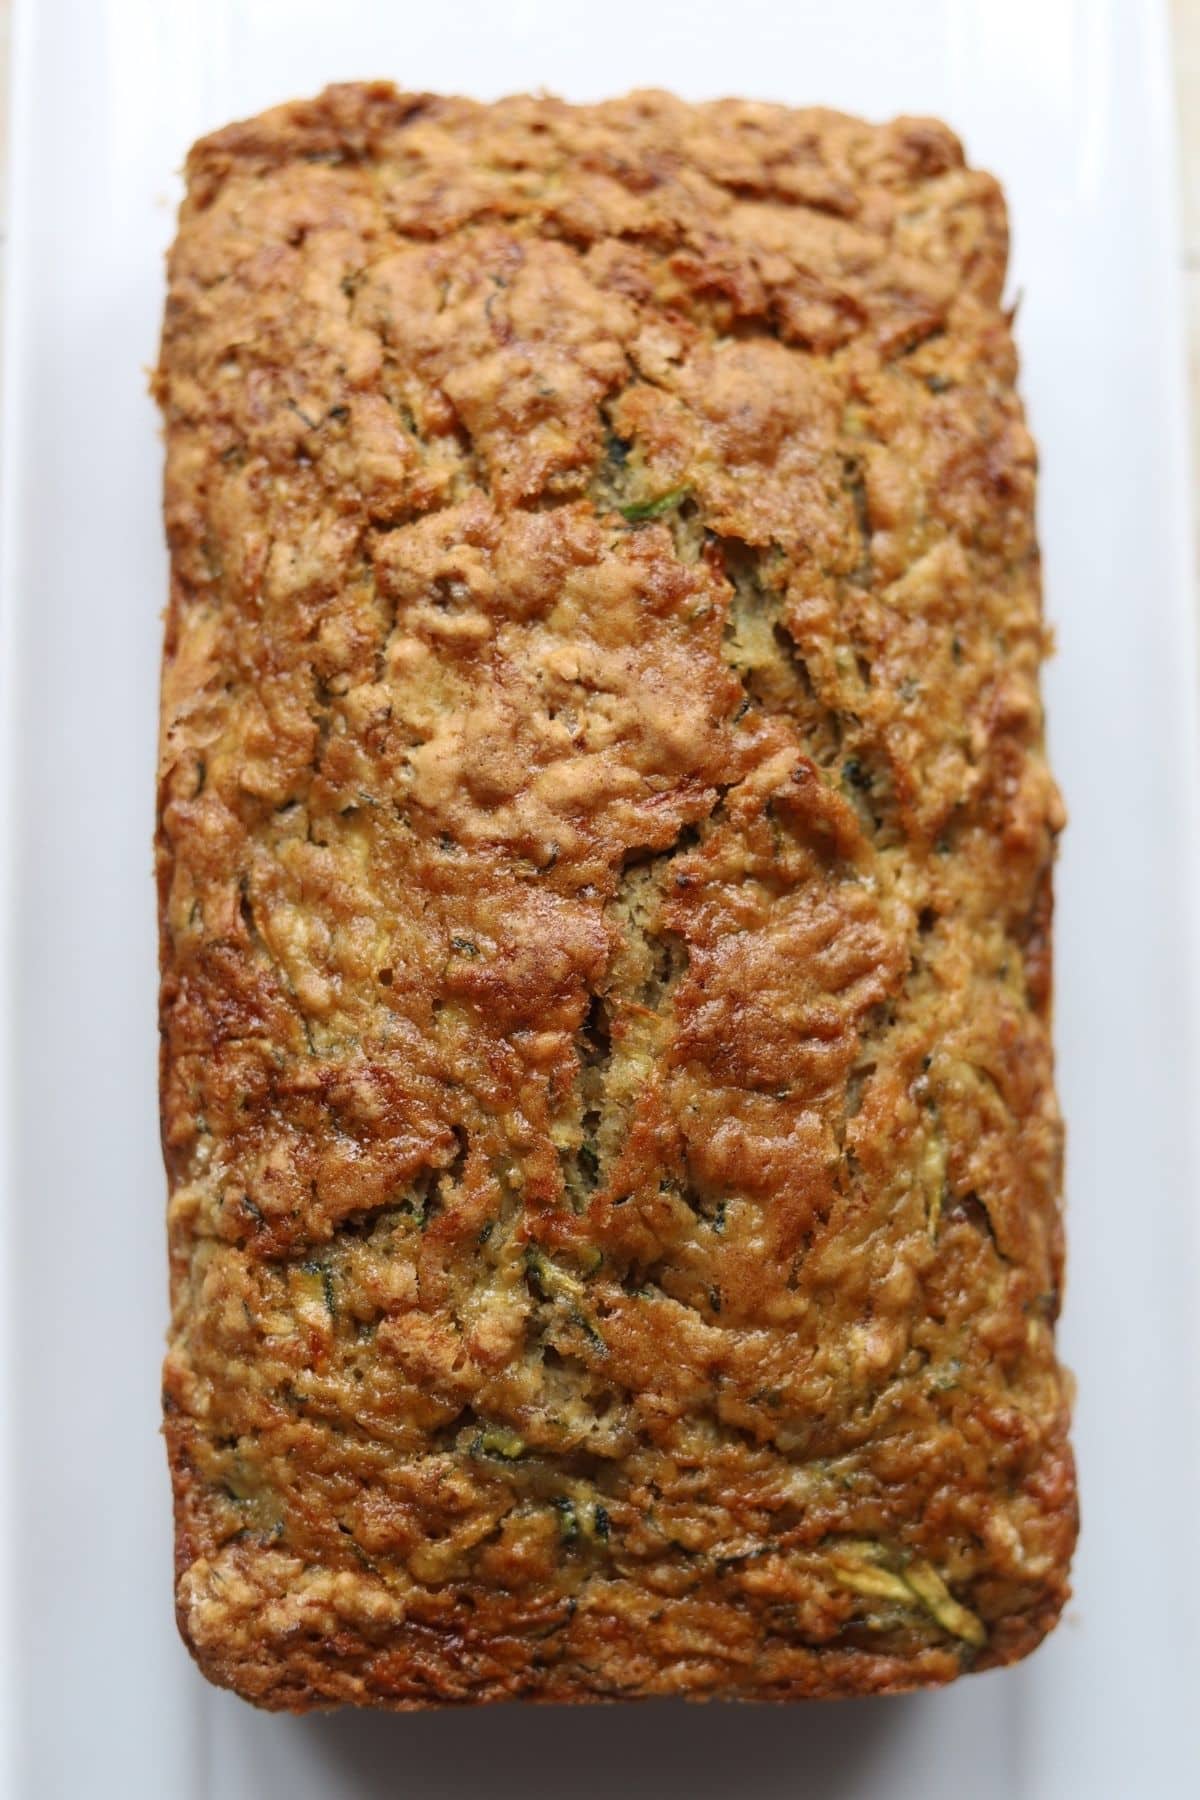 Full loaf of zucchini and banana bread.